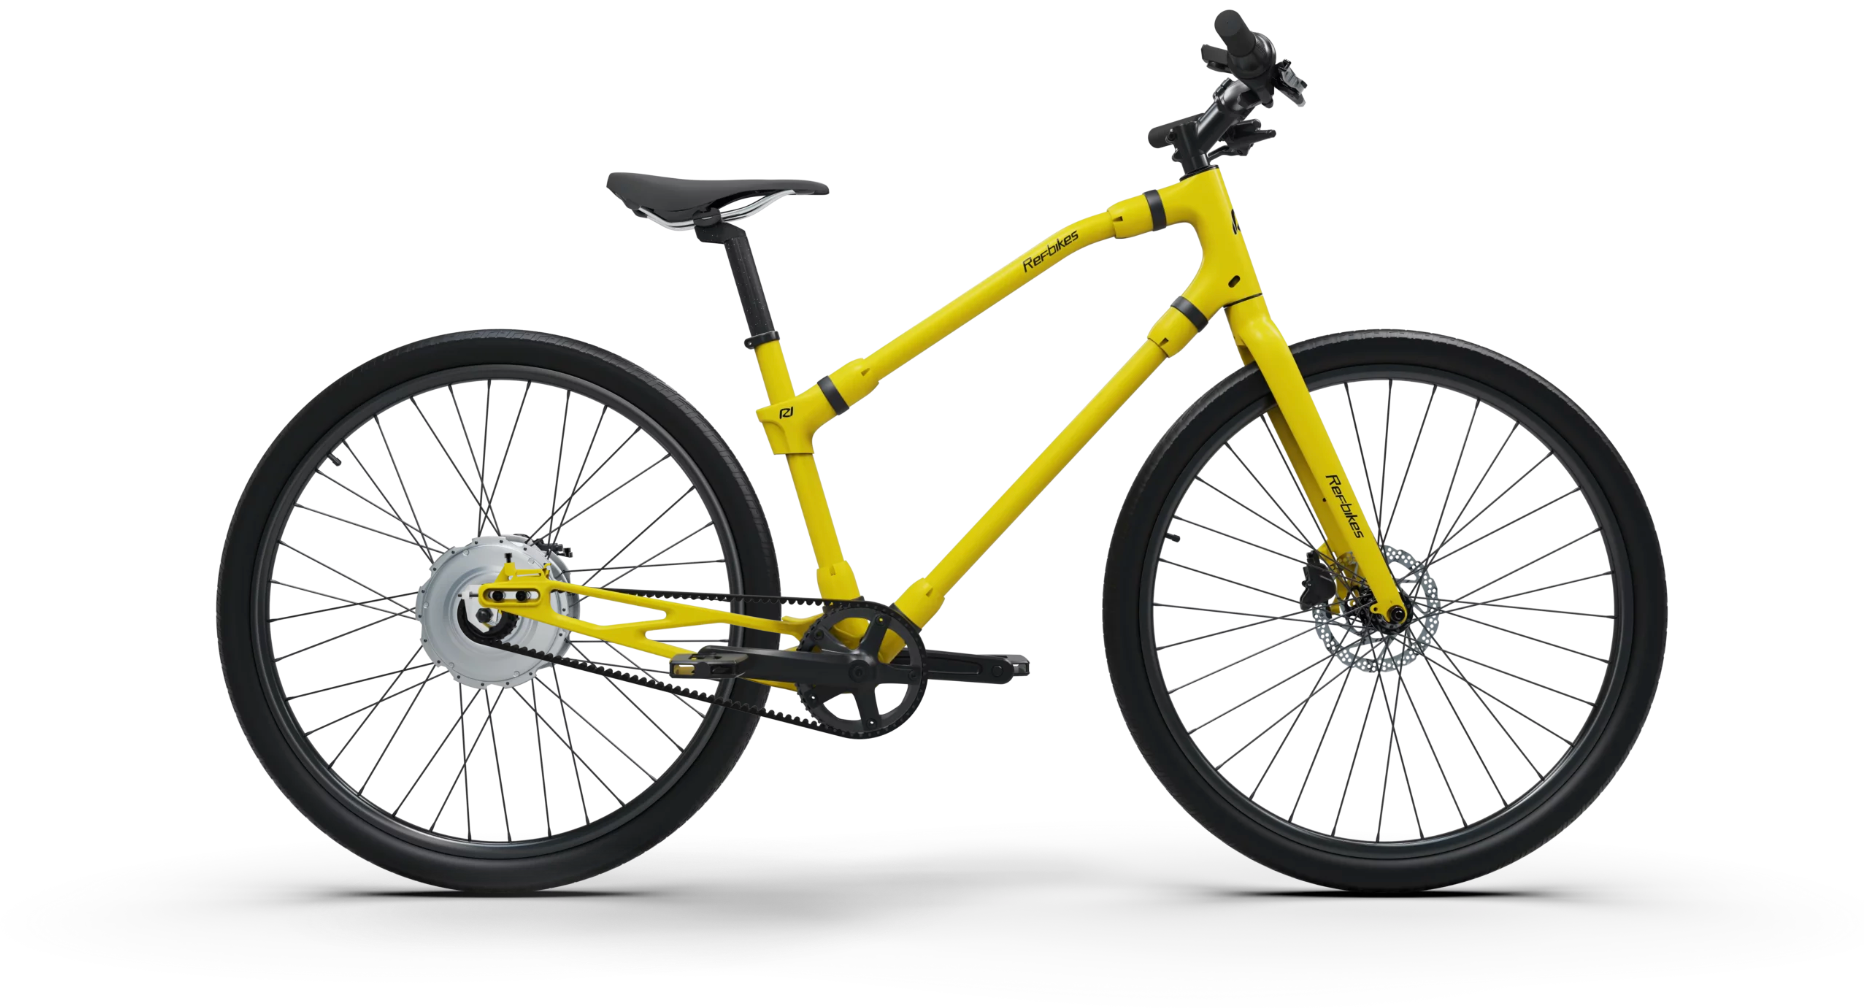 Vibrant yellow Essential Boost bike featuring a minimalist frame.